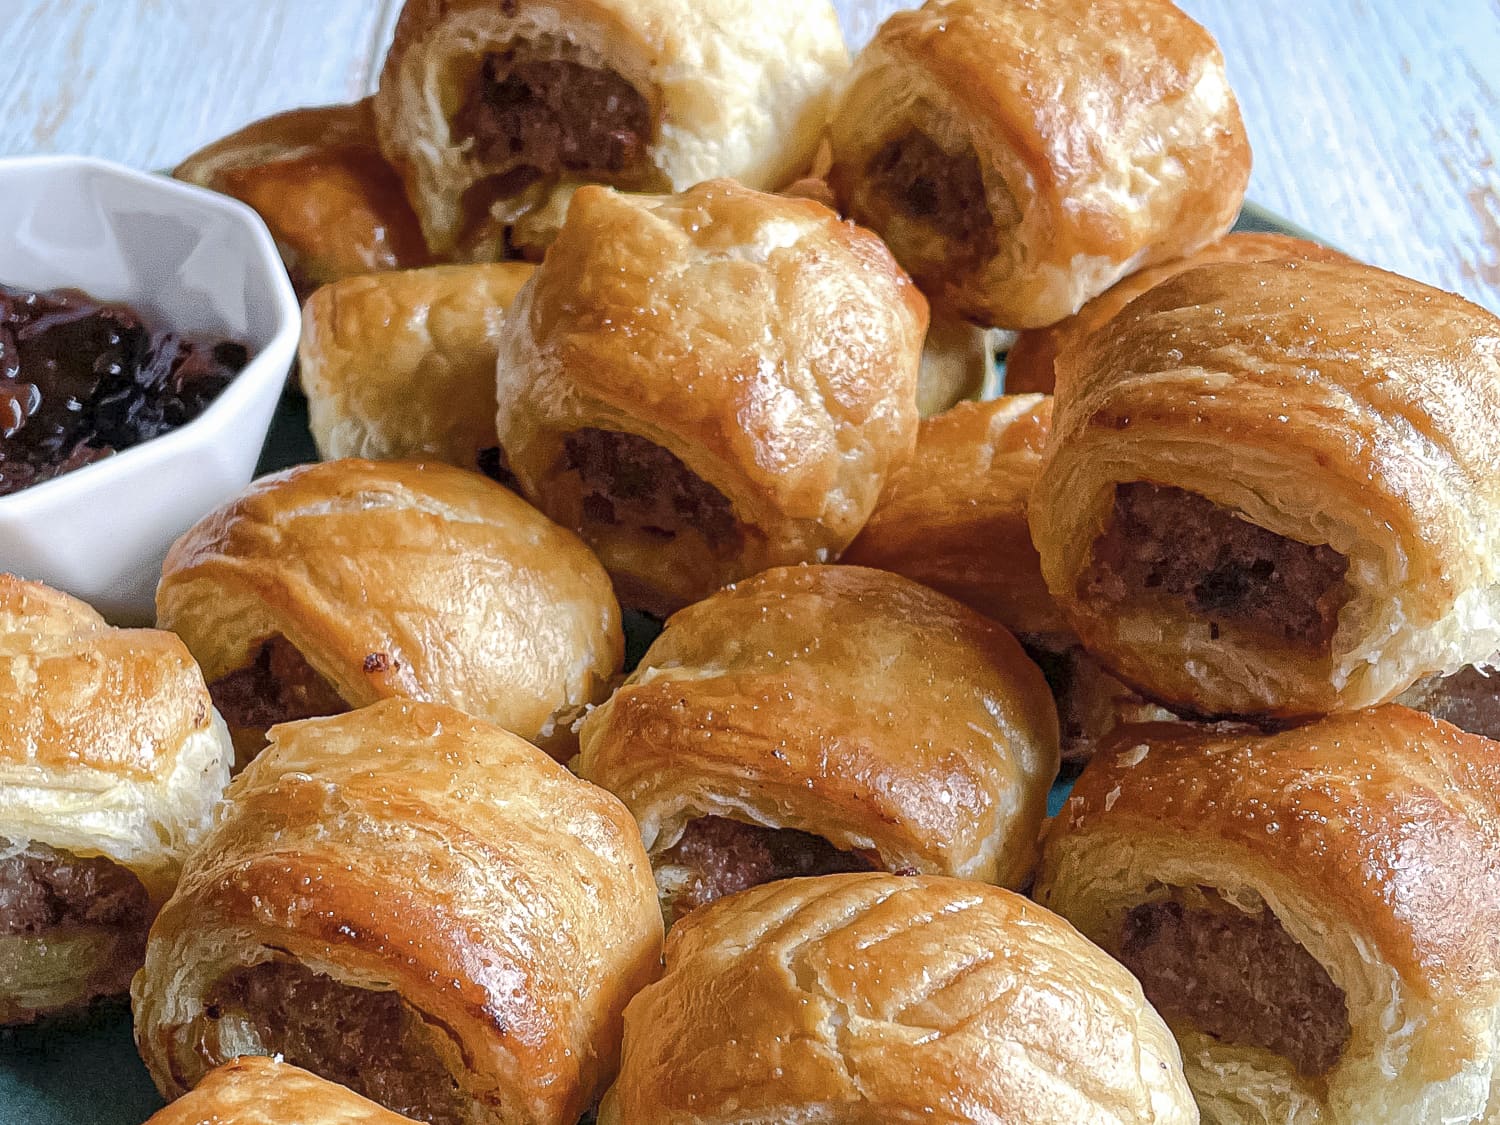 South African Sausage Roll Recipe: A Delicious Twist on a Classic Snack